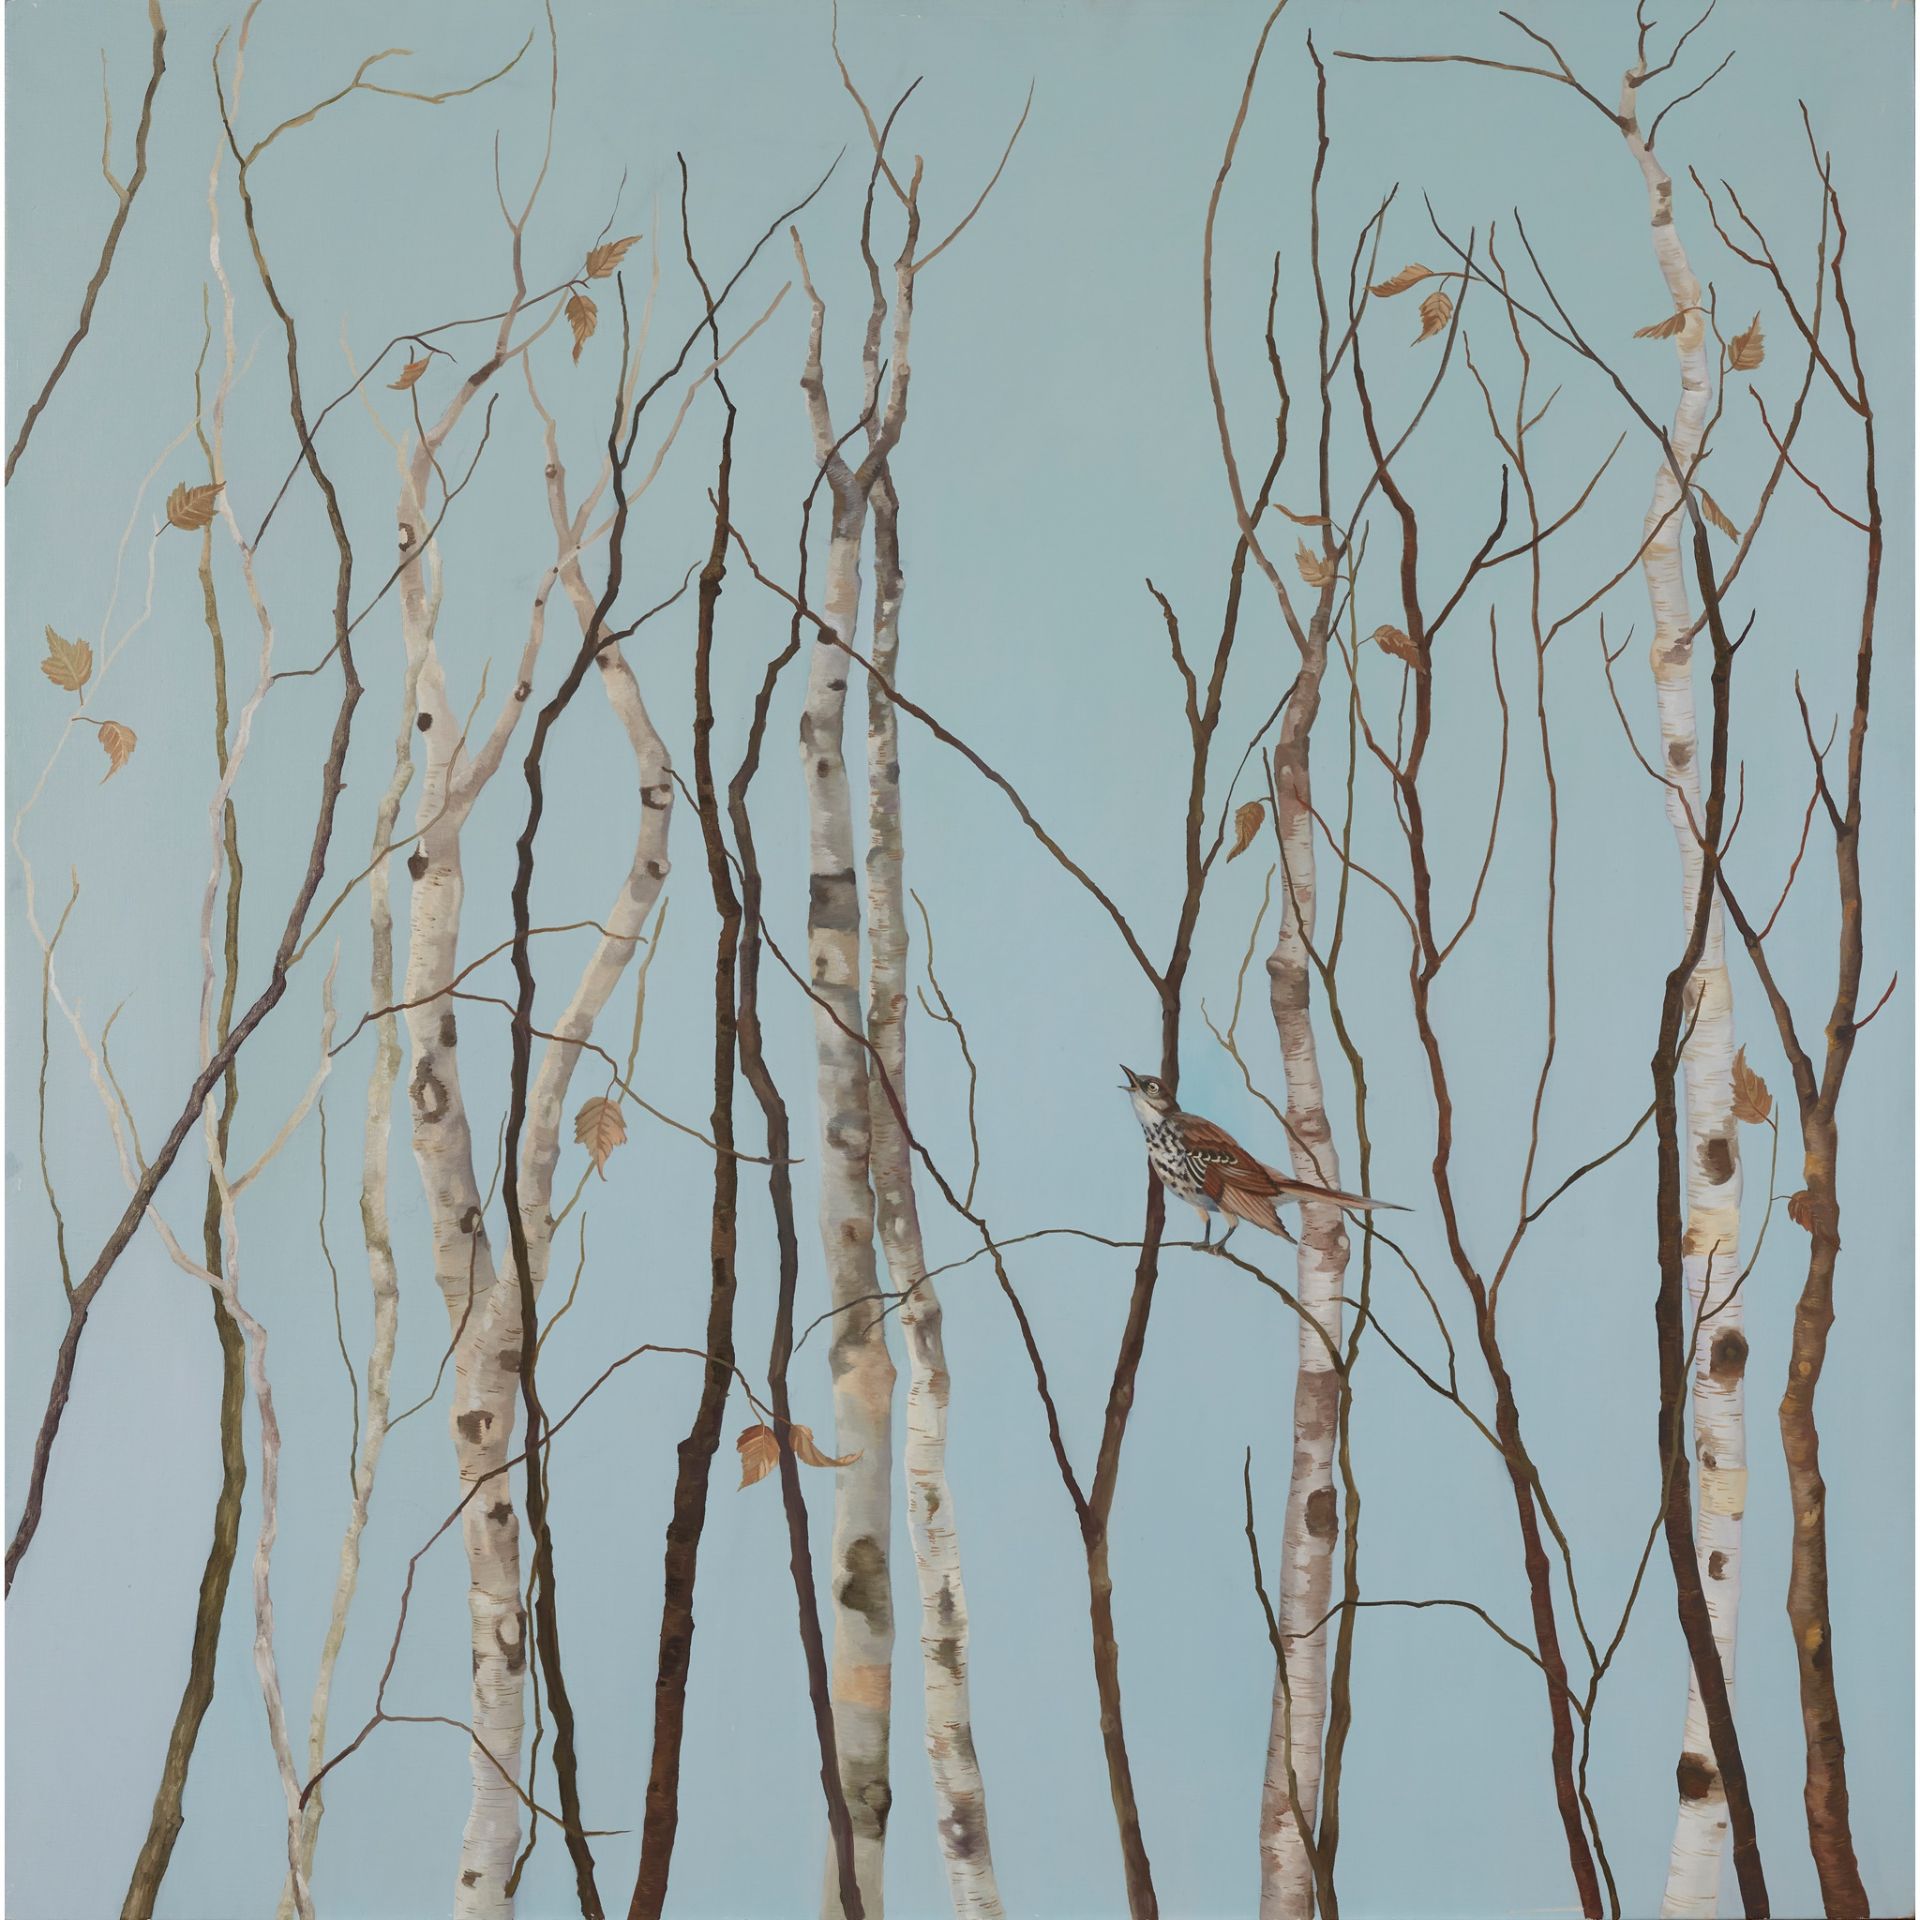 GRACE O'CONNOR (AMERICAN) UNTITLED (TREE BRANCHES AND SONGBIRD)